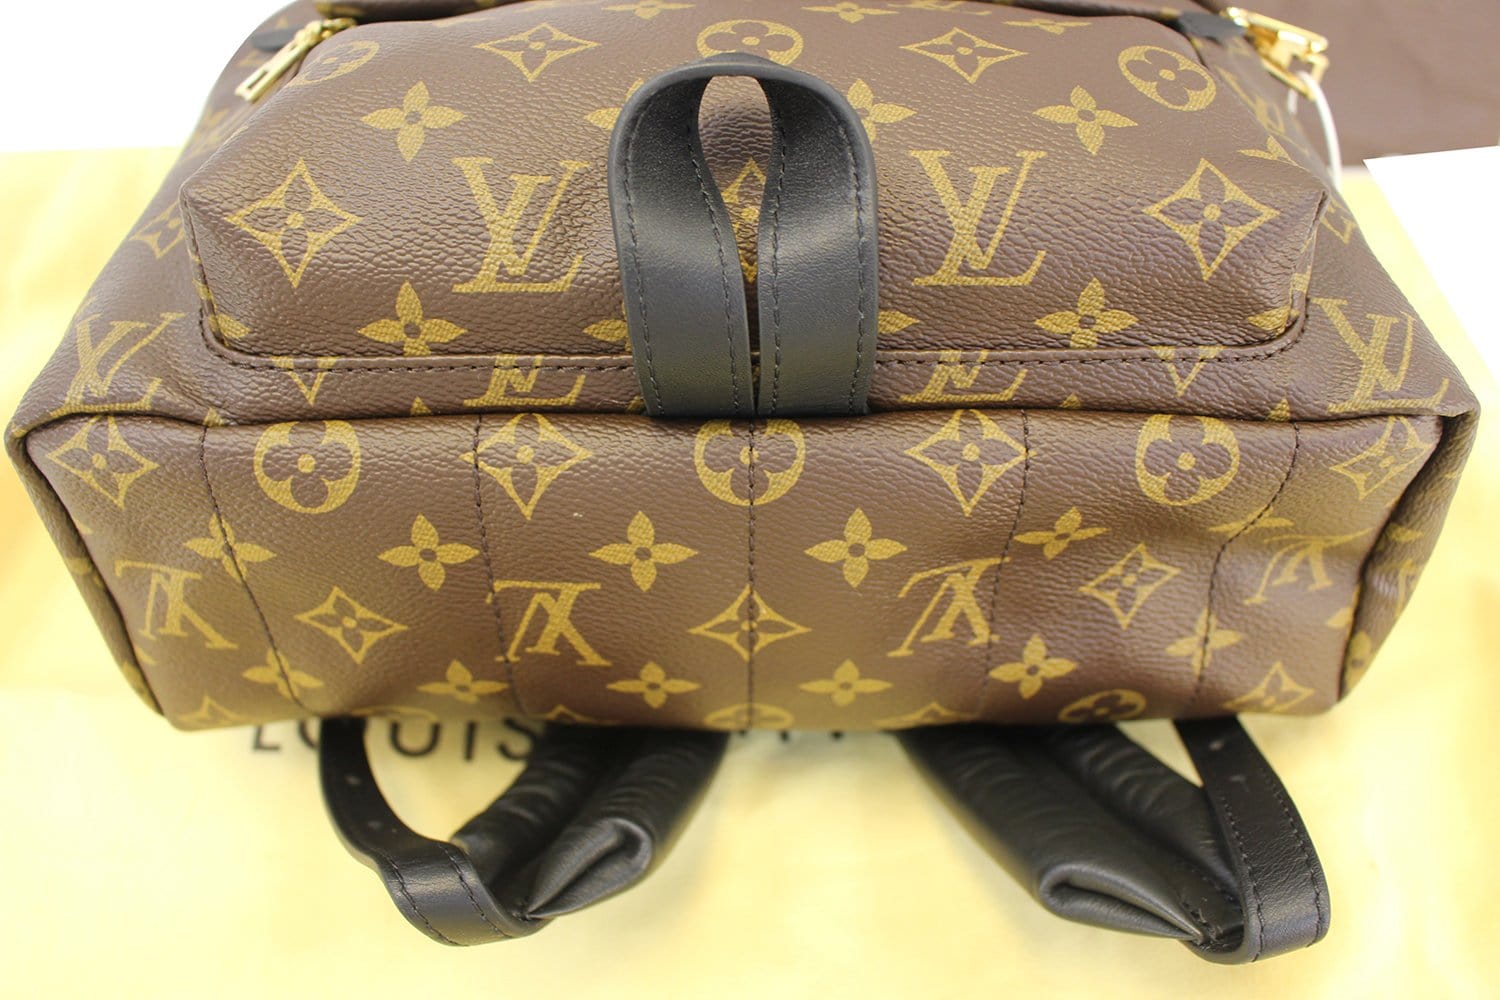 louis vuitton fanny pack fake vs real